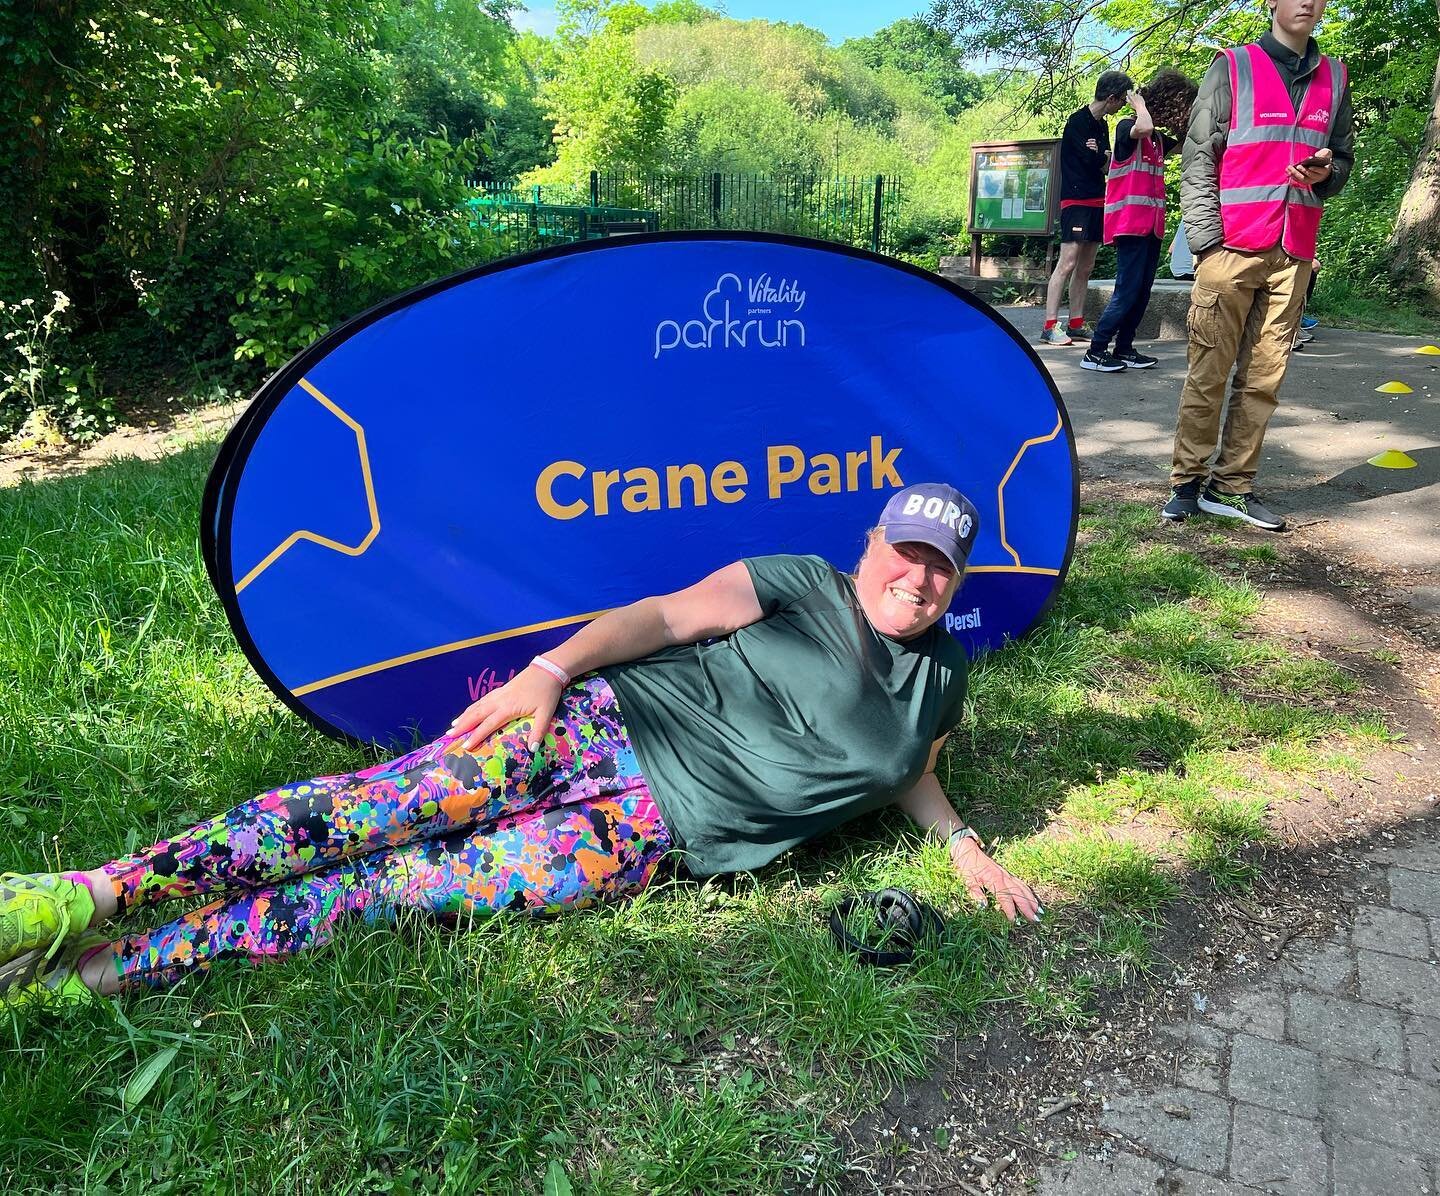 🧡🧡130th Park Run Done 🧡🧡

⭐️At the friendliest, Crane Park⭐️

🧡And my quickest time of the year so far, while the female Record Holder of Crane Park Park Run @izzyhope13 wrangled the Shihtzus to avert disaster! 🧡

#parkrun #parkrunuk #cranepark